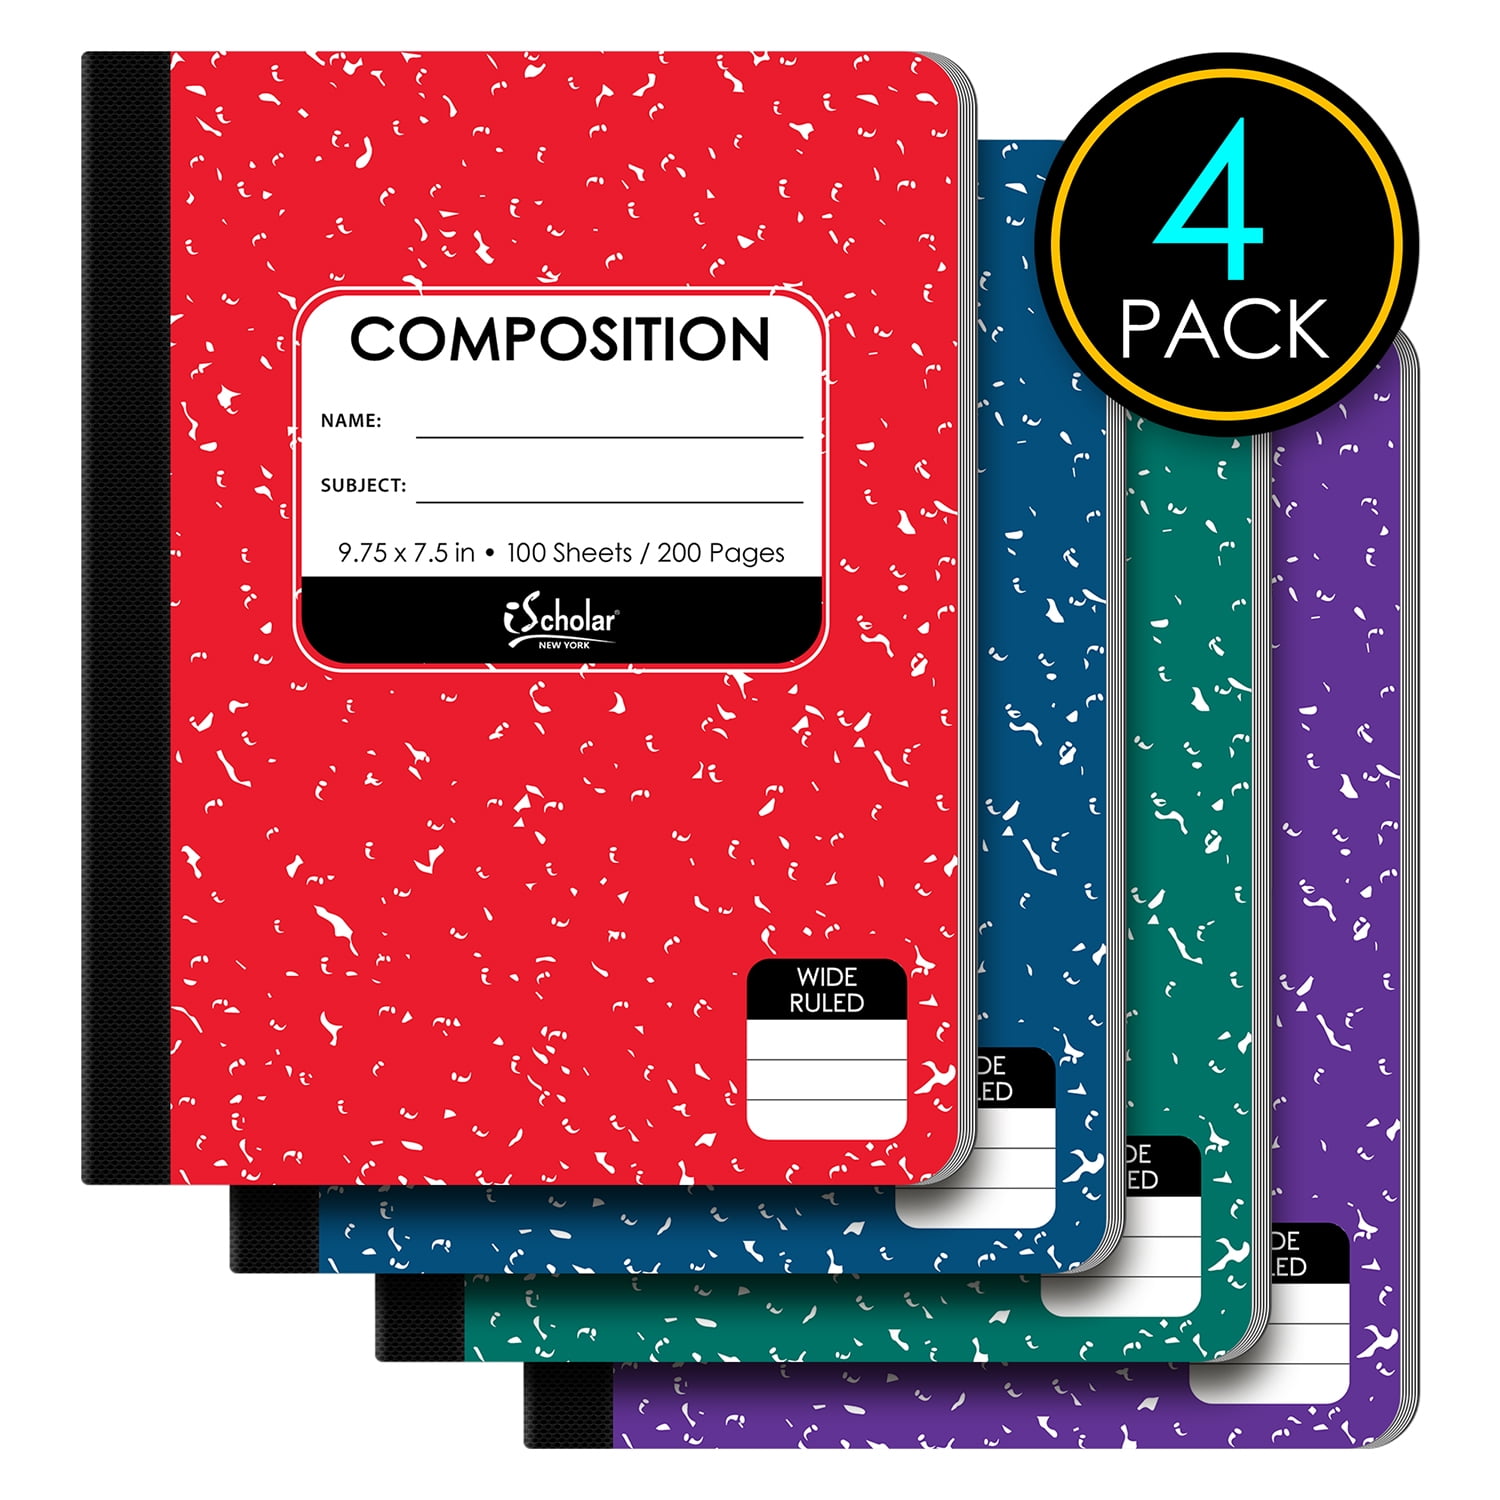 73810 100 Sheets Five Star Composition Book/Notebook 9-3/4 x 7-1/2 Black Wide Ruled Paper